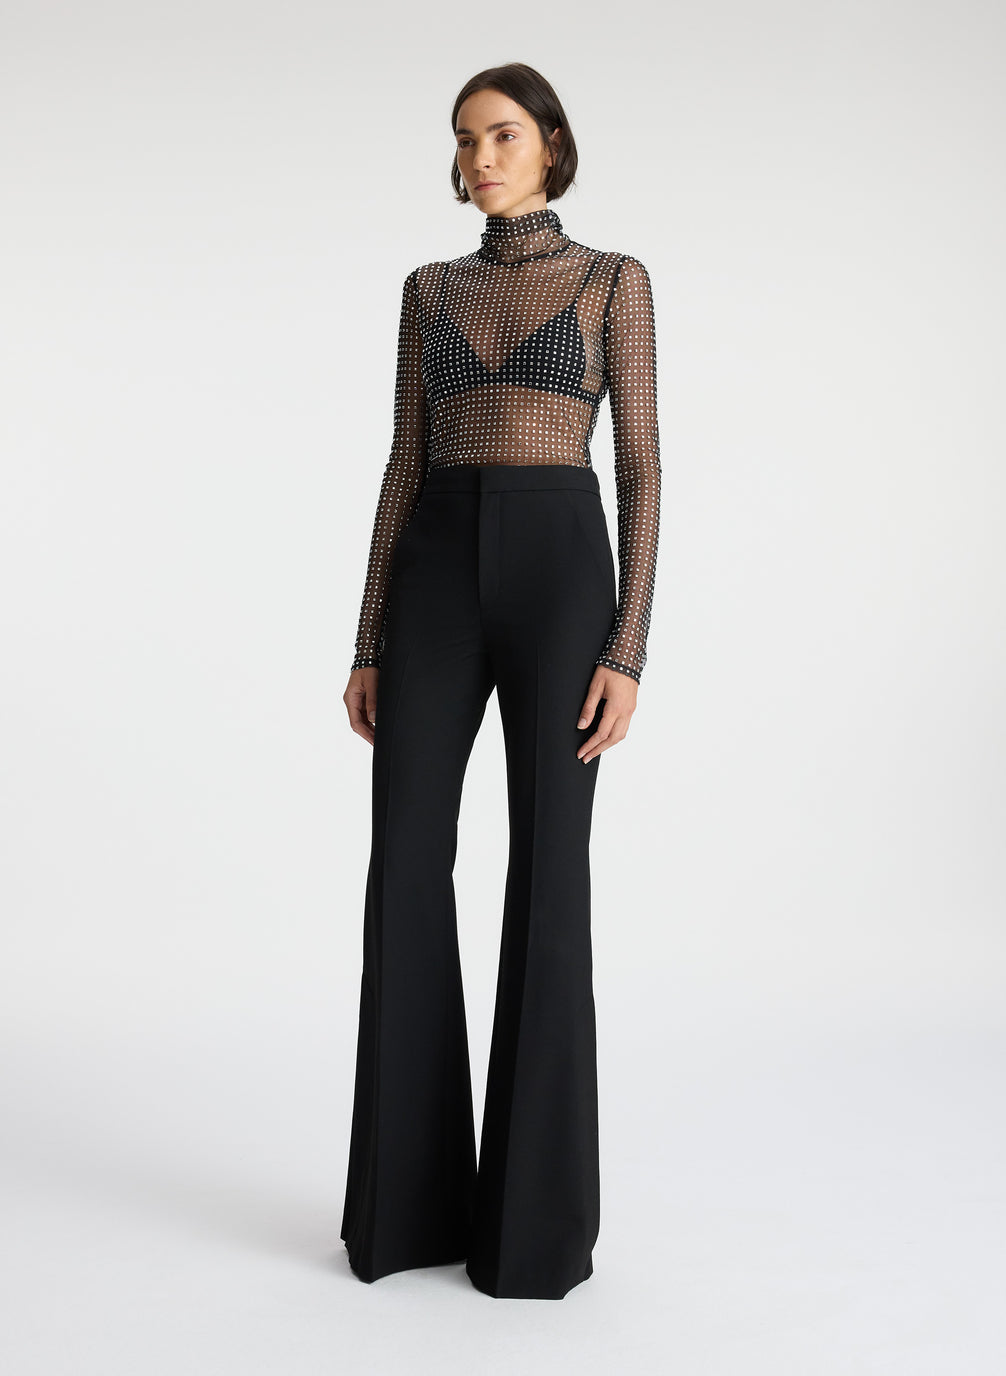 side view of woman wearing sheer black mock neck long sleeve with allover rhinestone embellishment and black pants